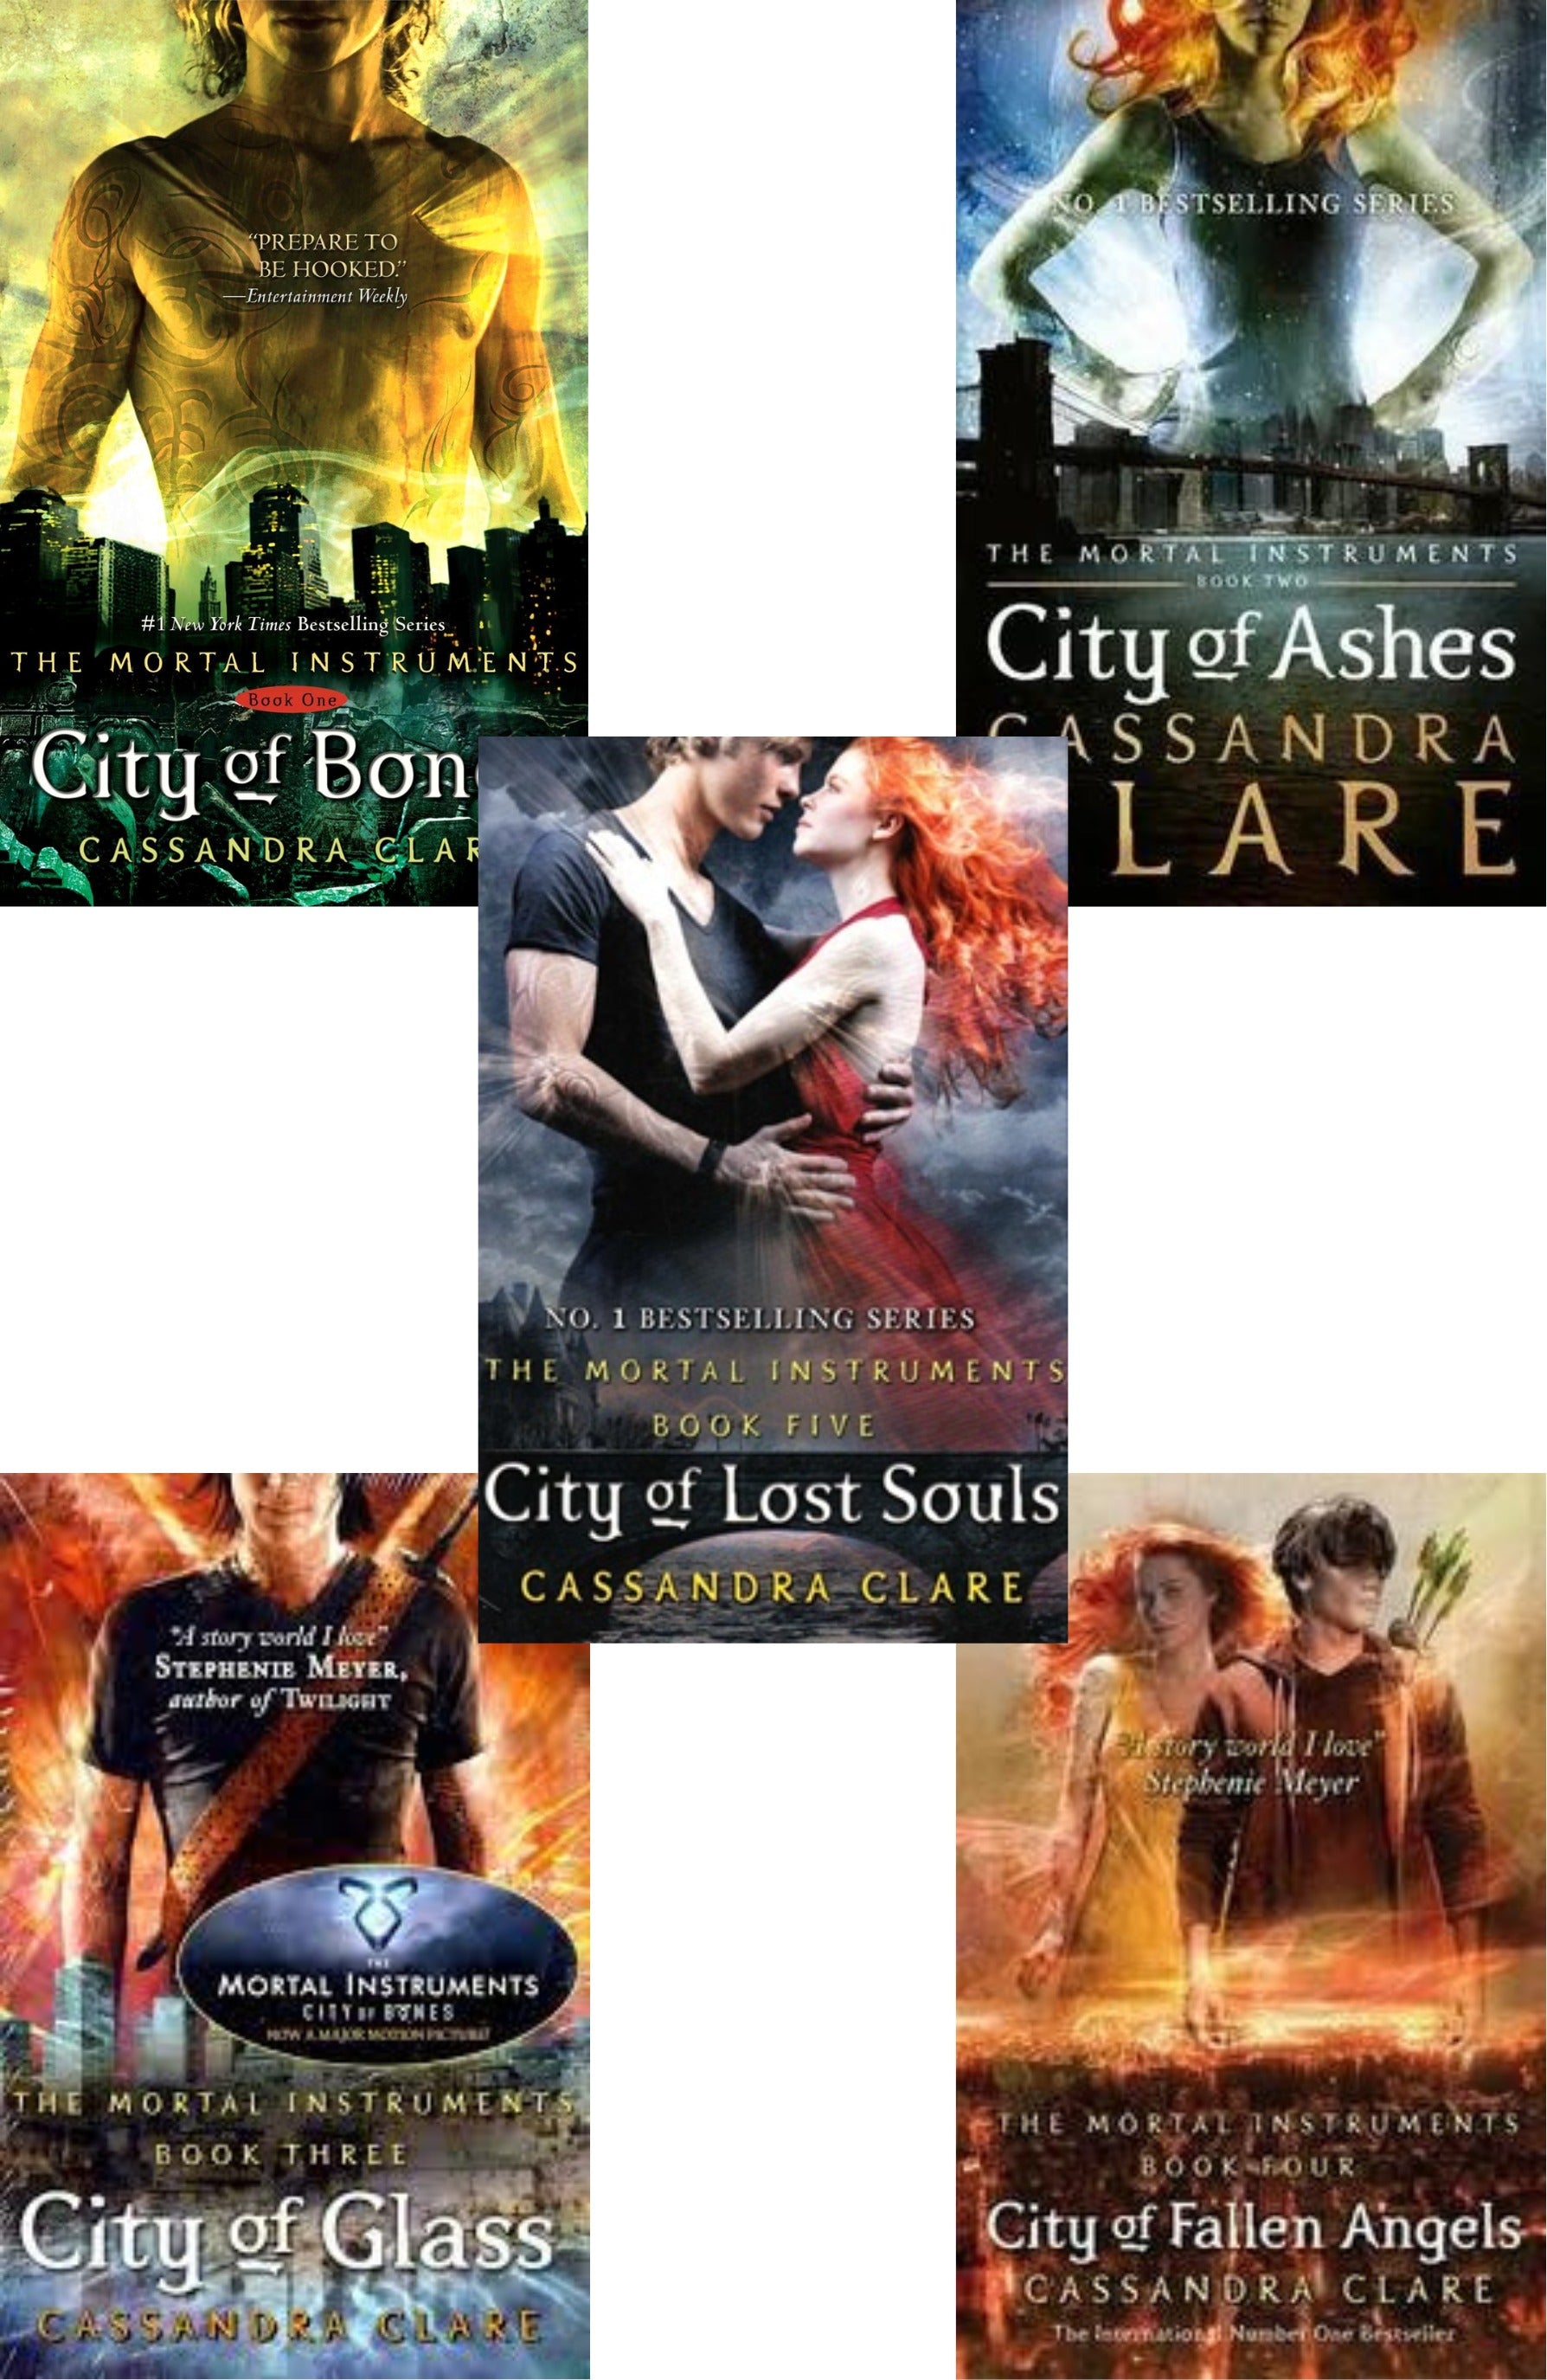 The Mortal Instruments Series By Cassandra Clare